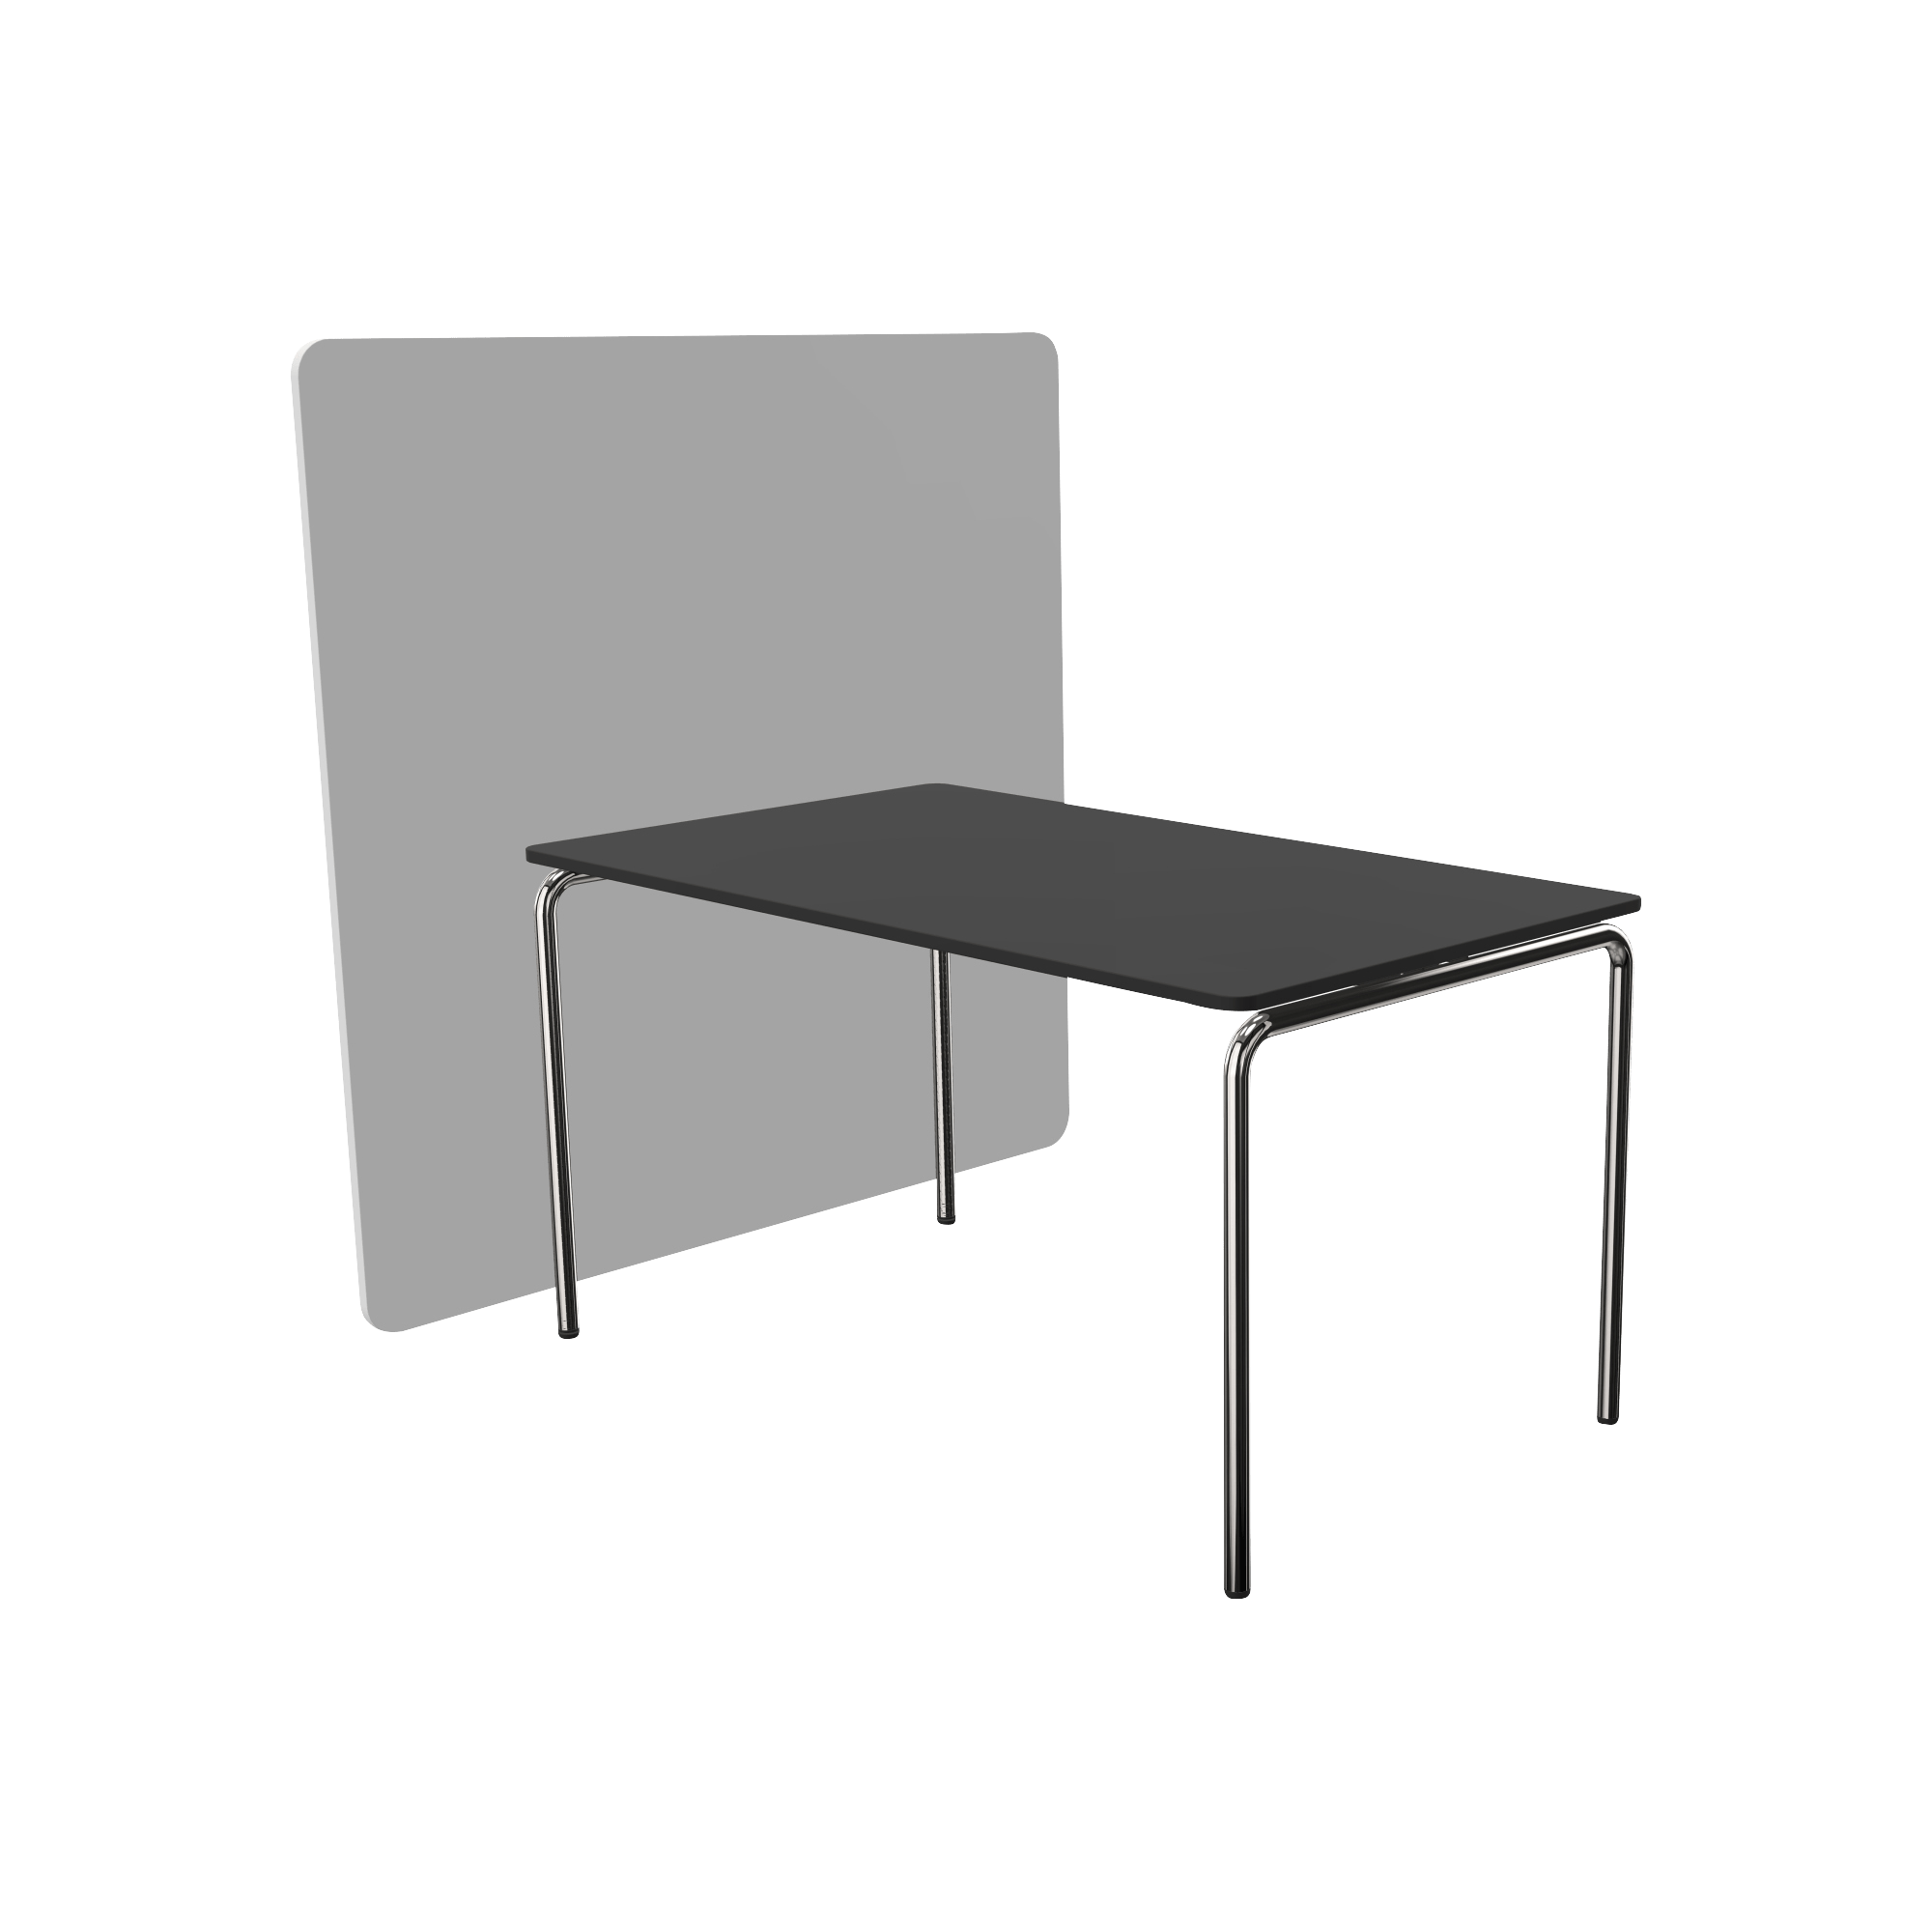 A black table with a grey screen divider attached to it